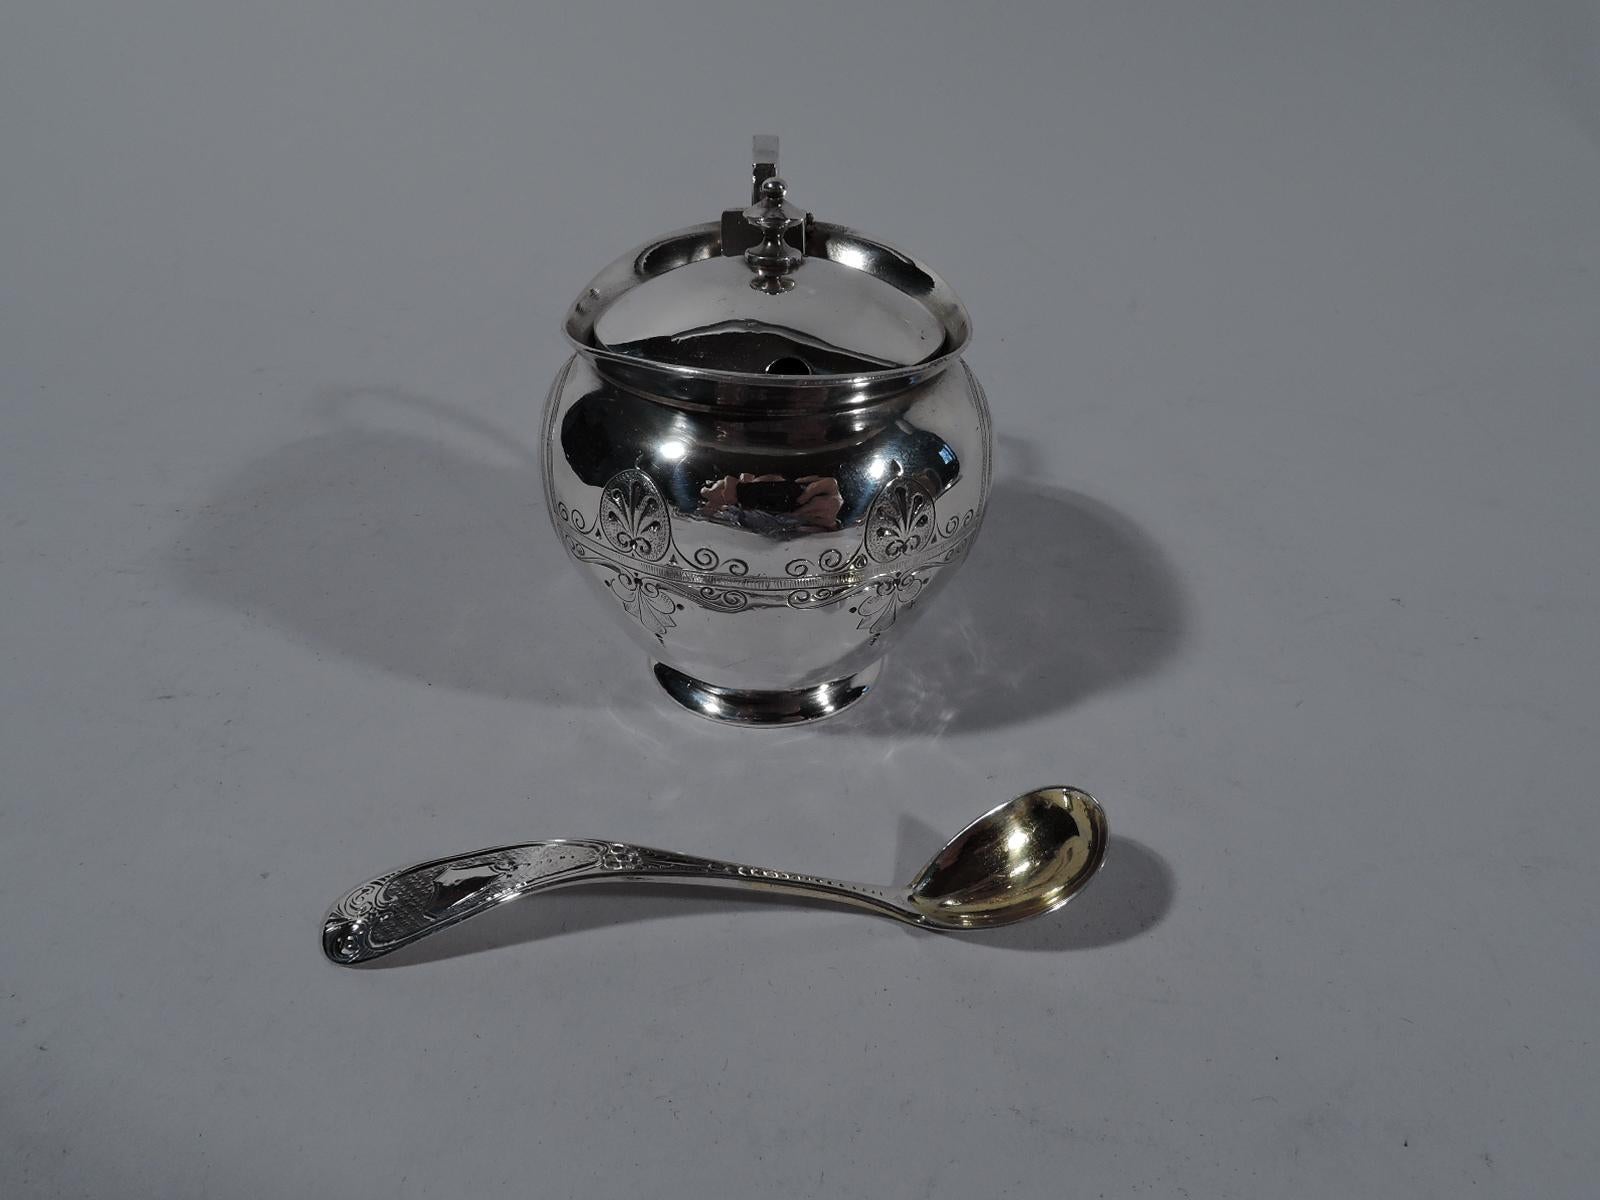 Aesthetic Movement Aesthetic Coin Silver Mustard Pot with Ladle by Krider of Philadelphia